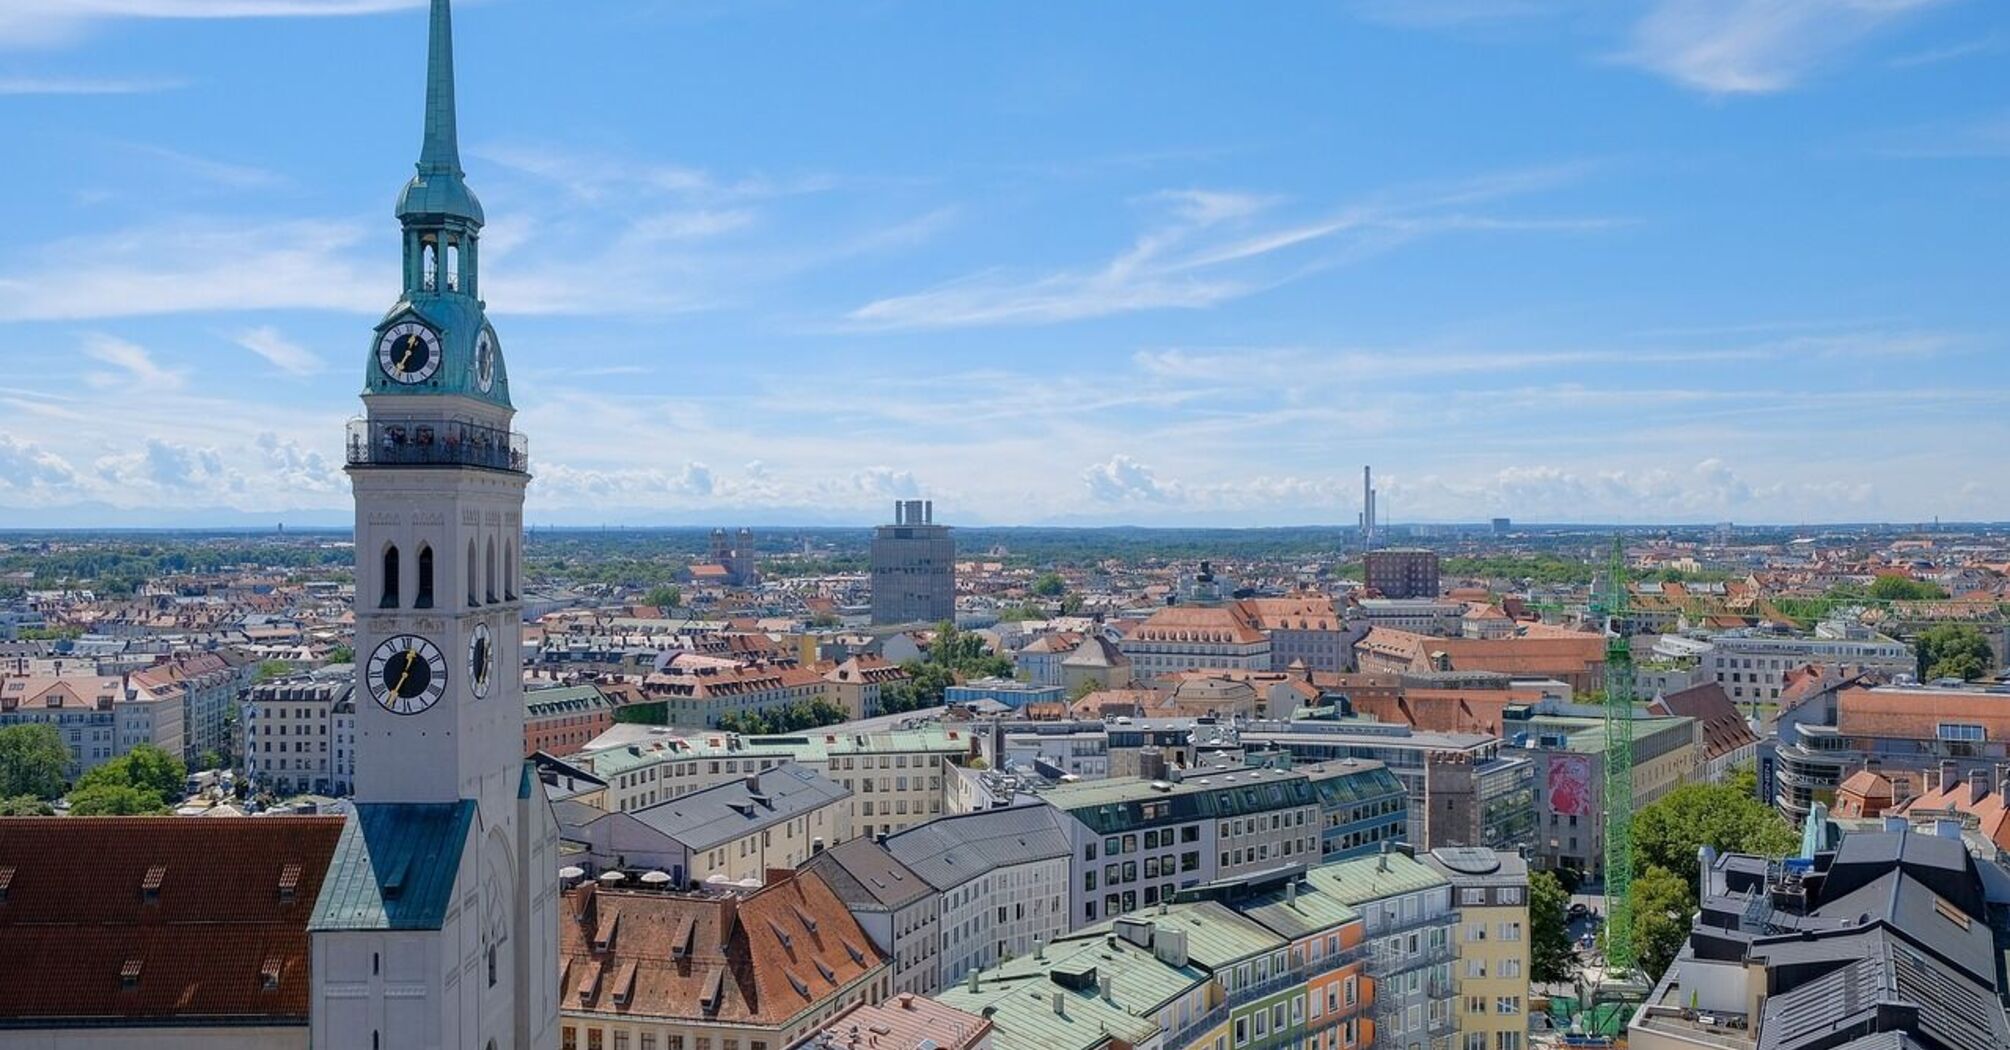 Munich travel guide: which neighborhoods and hotels to stay in, what to see and where to visit in the capital of Bavaria, Germany